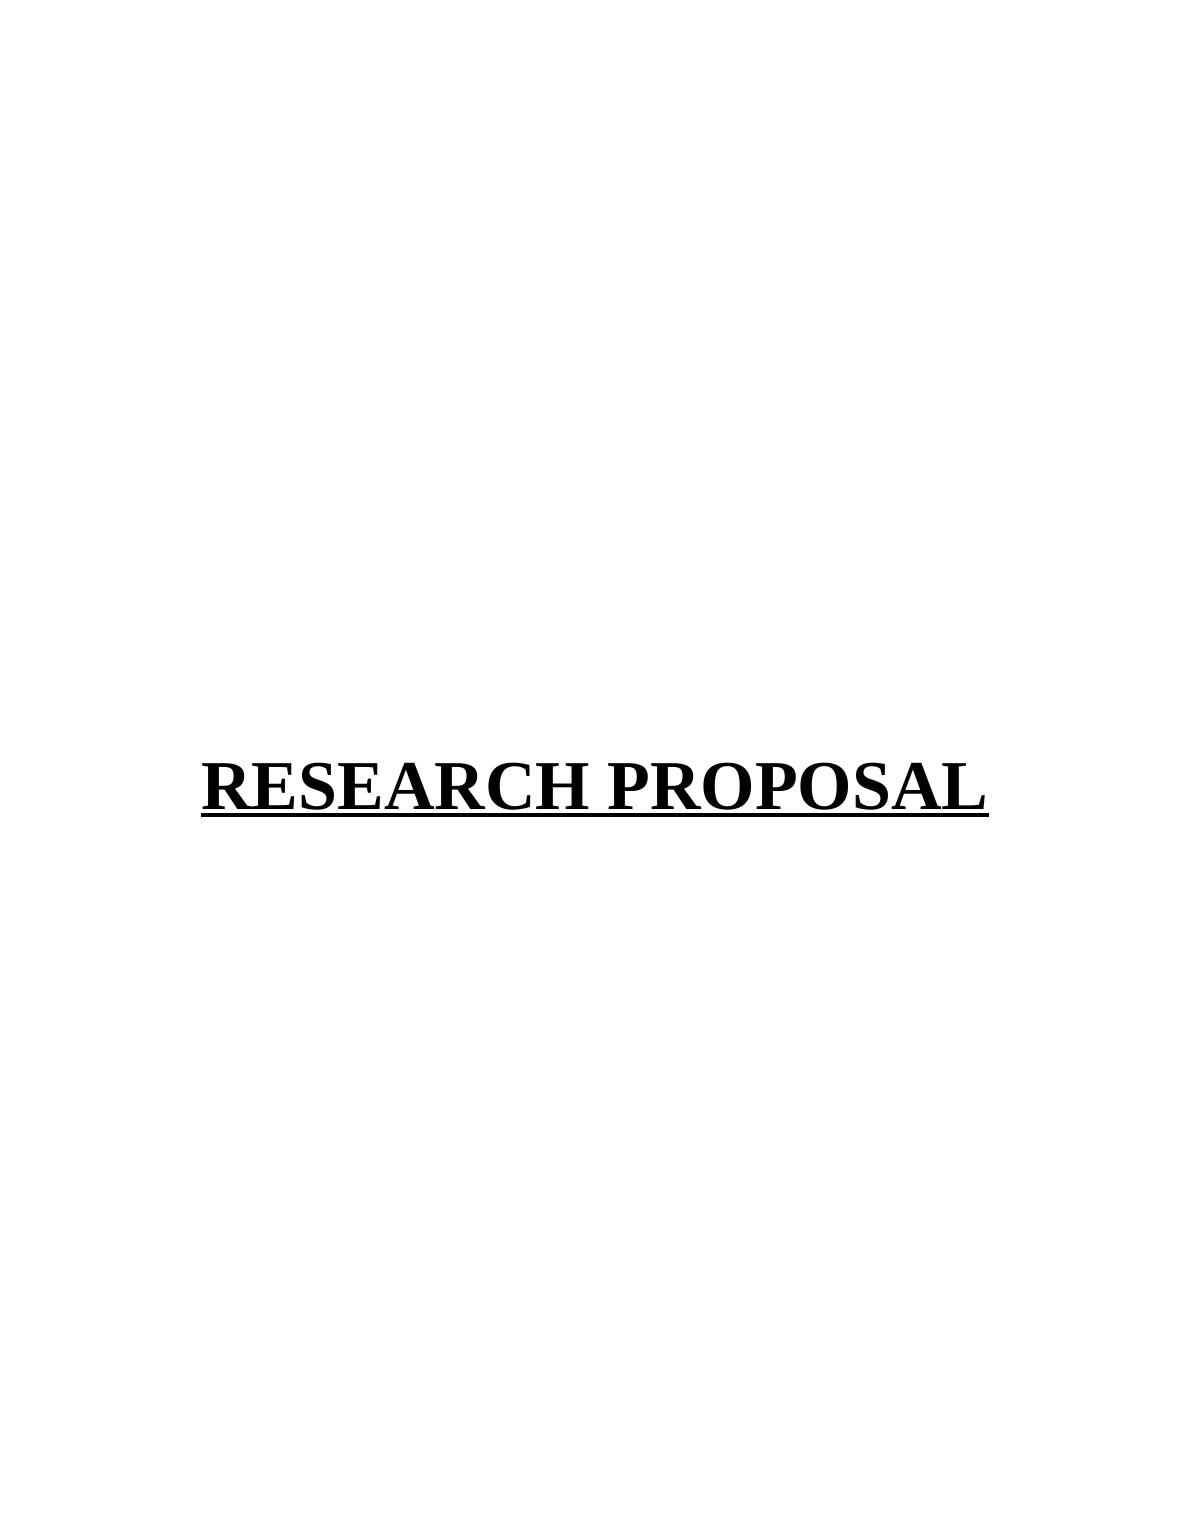 Research Proposal Assignment - impact of social media on tourism planning_1